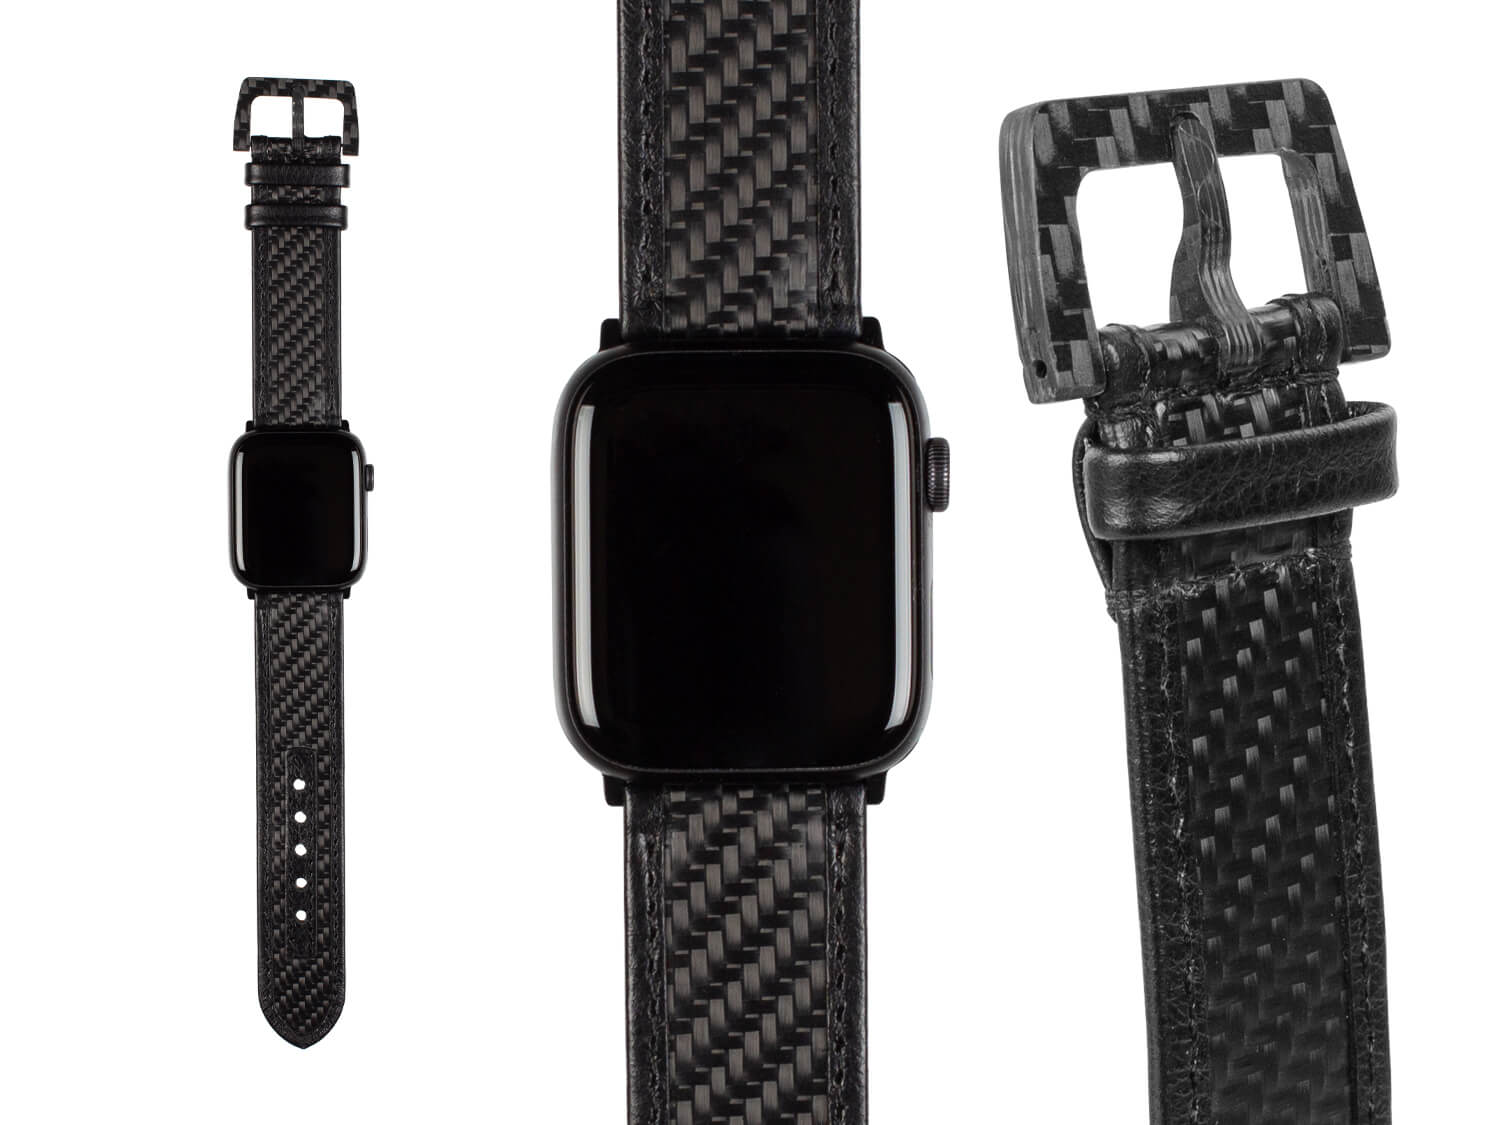 REAL Carbon Fiber & Leather Apple Watch Band (42mm/44mm) – Carbon Fiber Gear